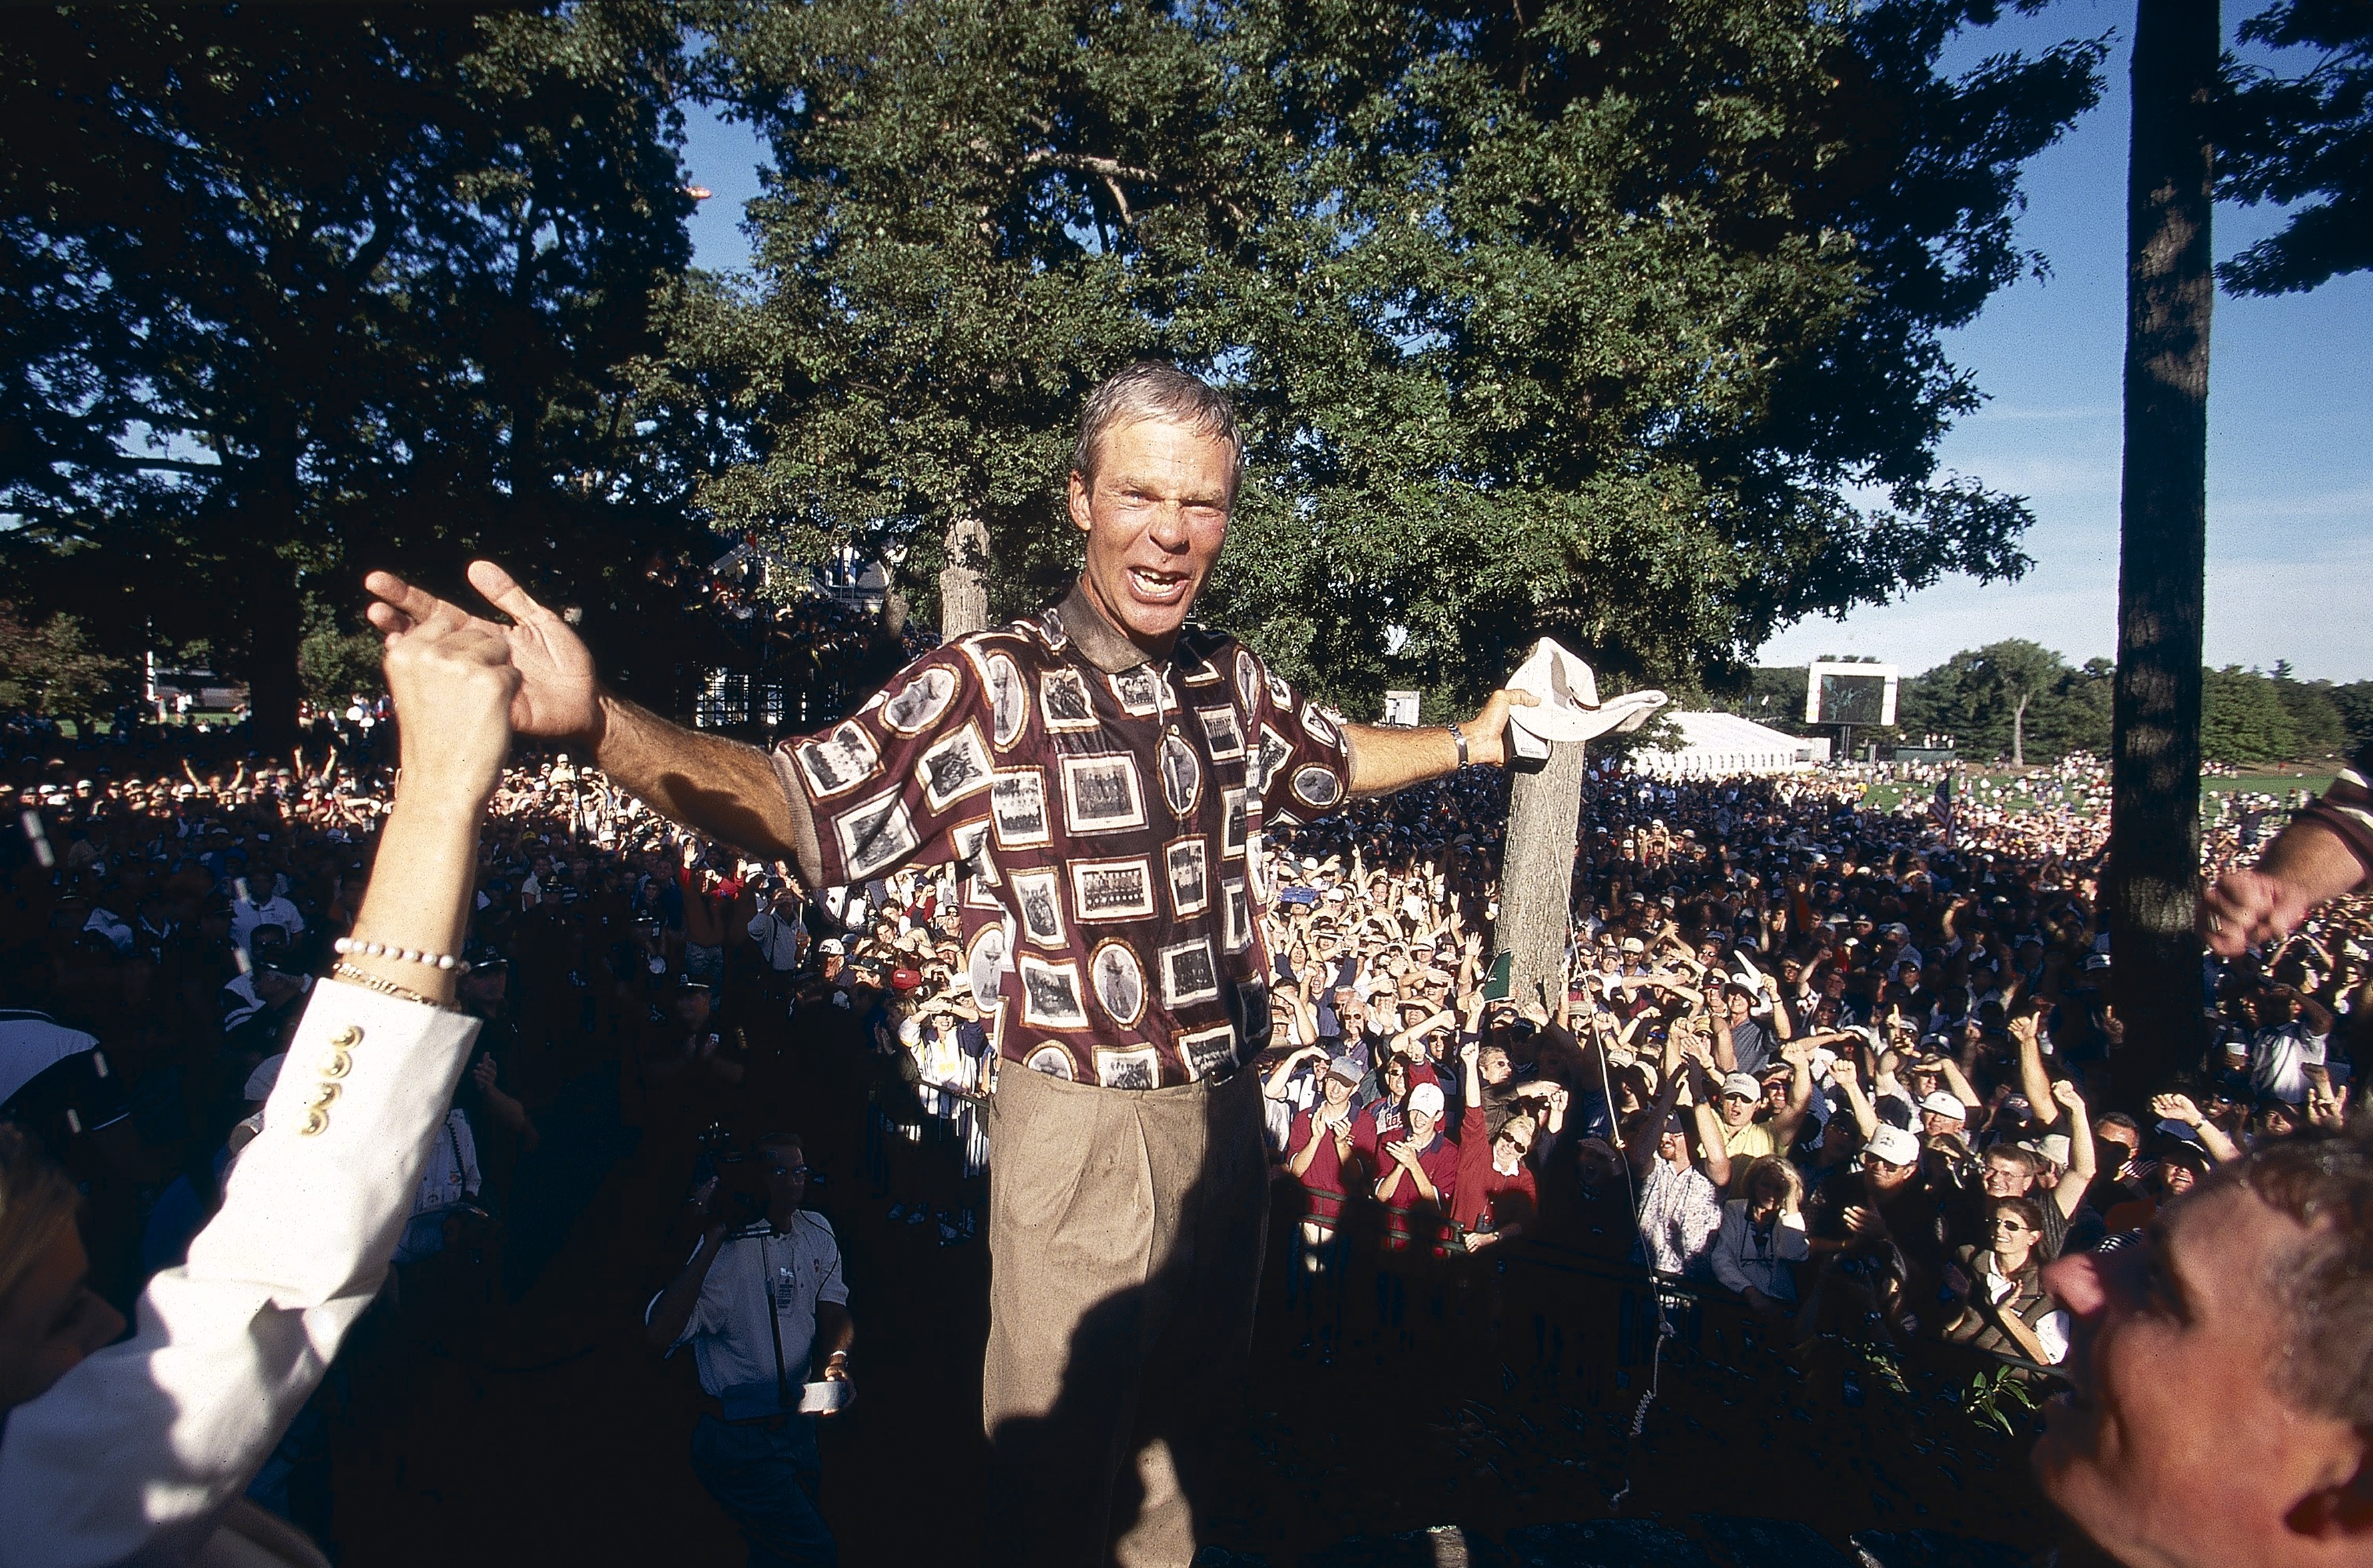 Ryder Cup, USA Ben Crenshaw showing off team attire for tournament with fans at The Country Club, Brookline, MA 9/26/1999